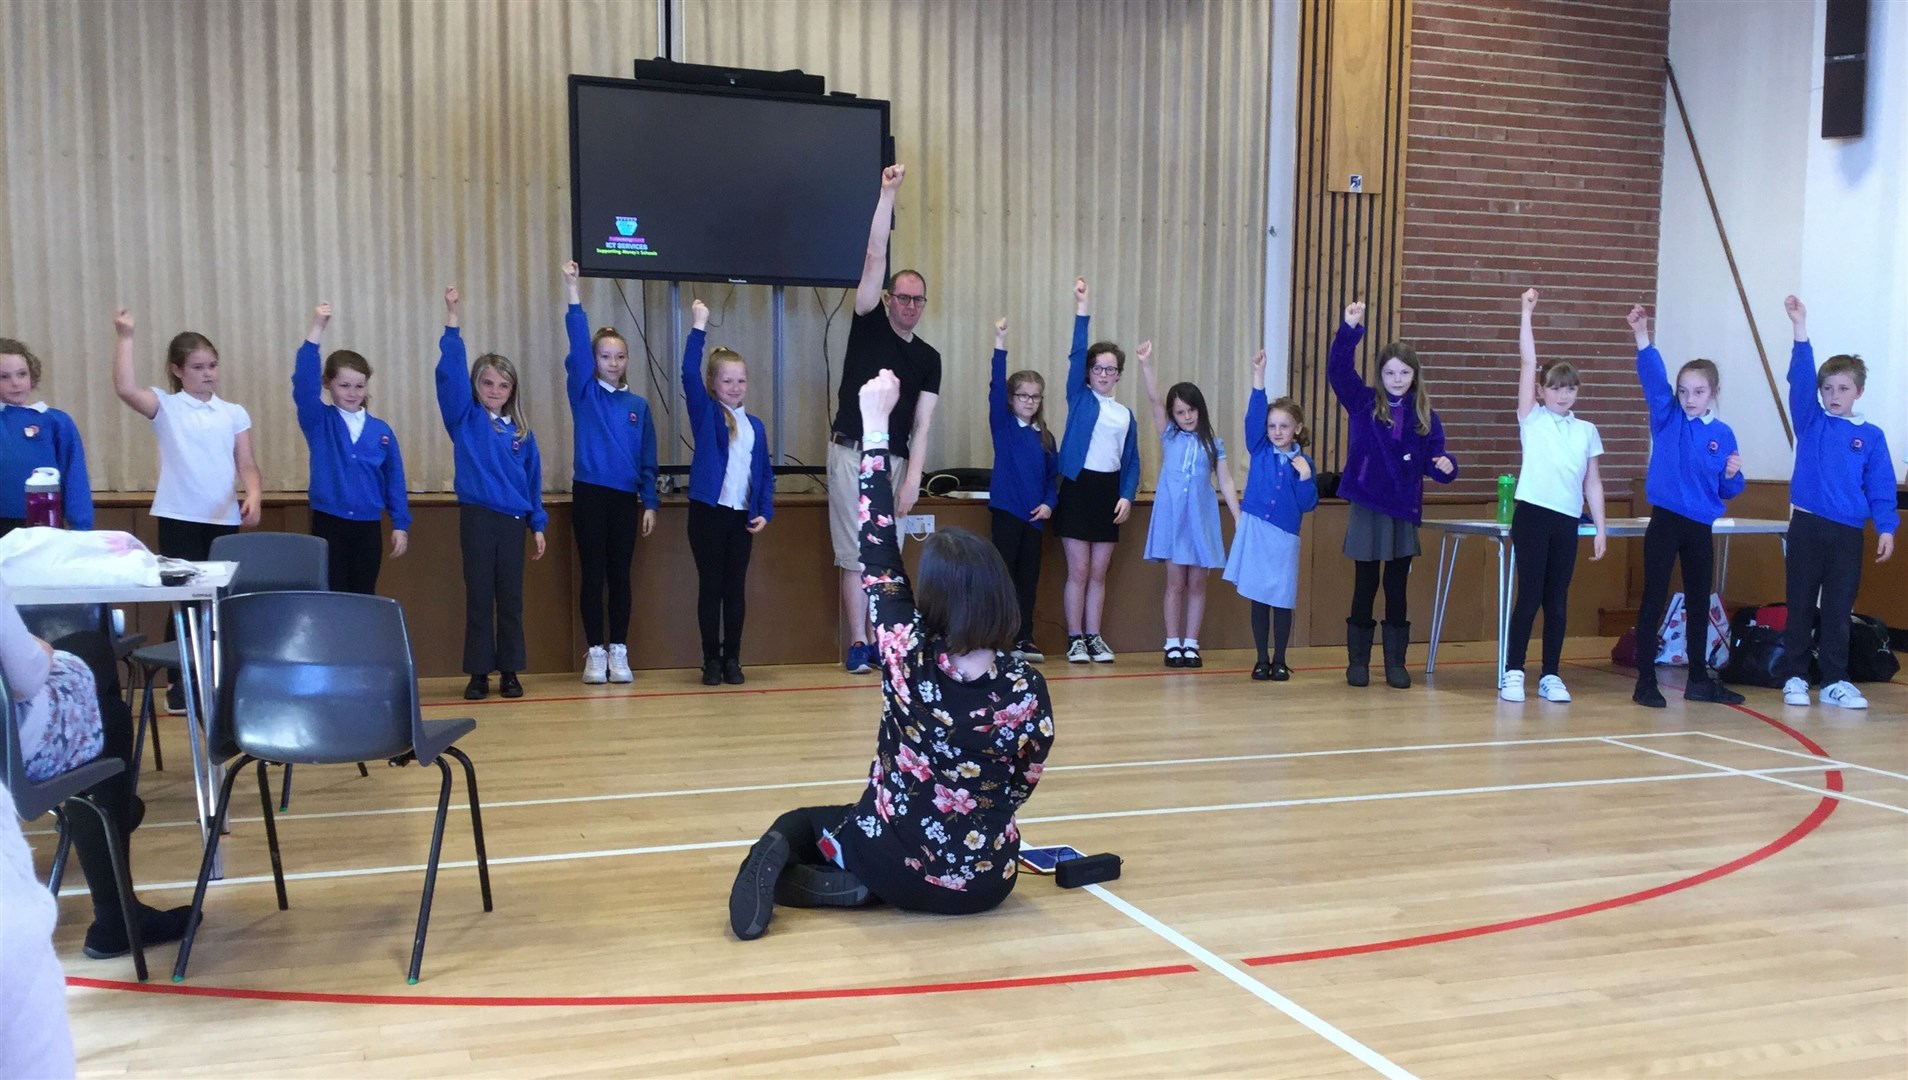 Members of the school's sign language club perform to newly qualified teachers from across Moray.